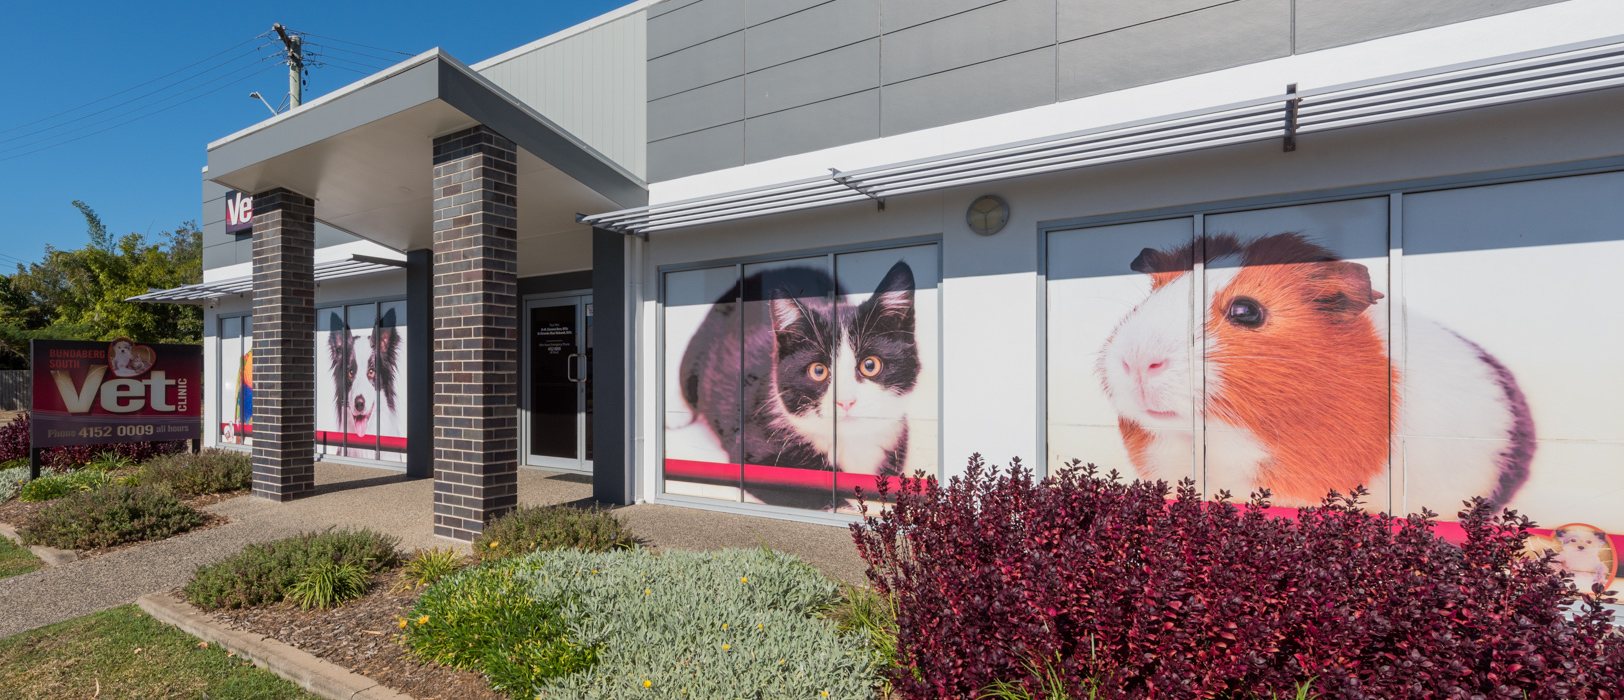 Bundaberg South Vet Clinic building showing animal images in the windows